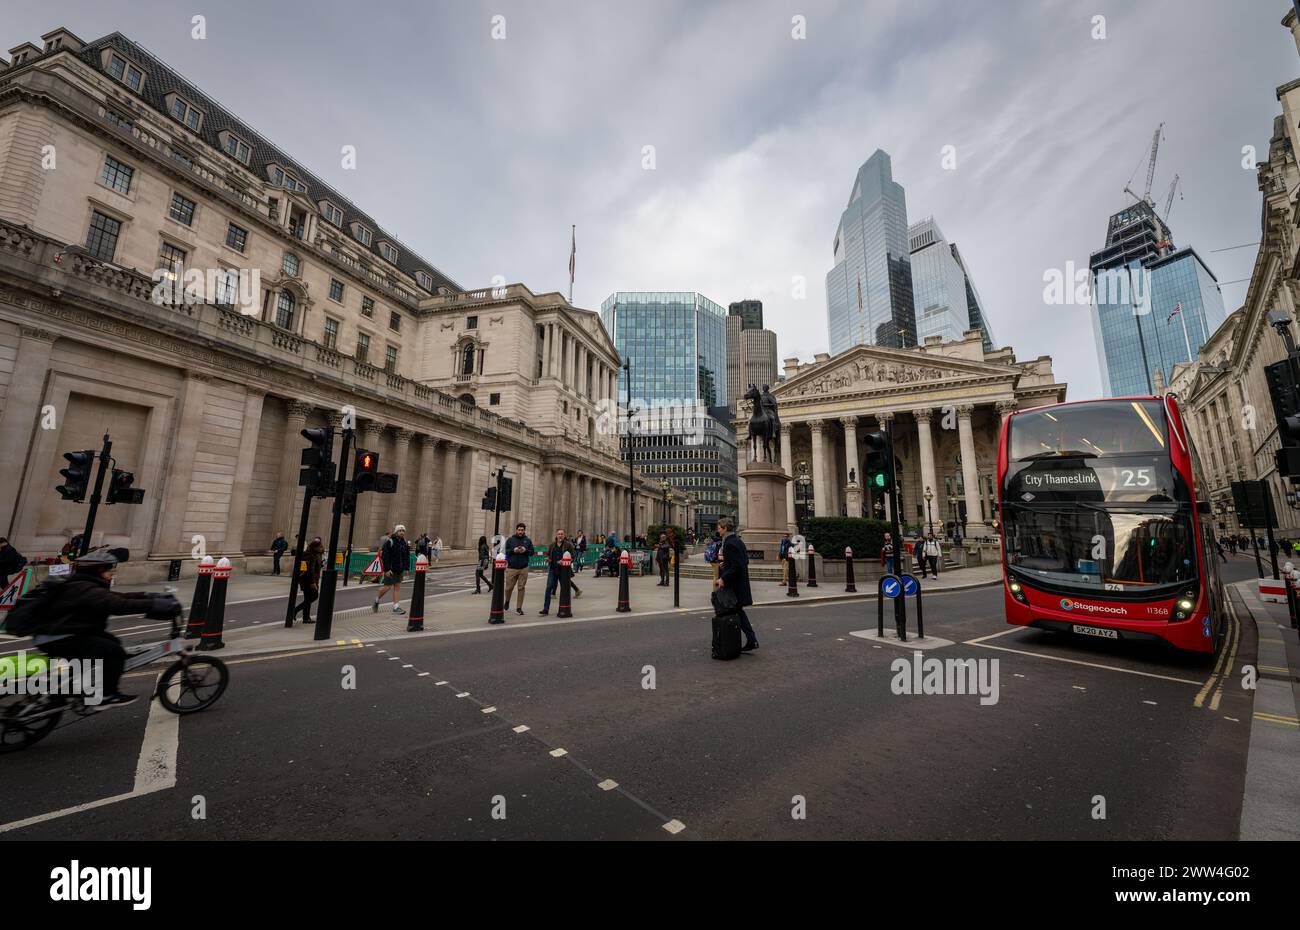 London, UK: Bank Junction in the City of London. Bank of England left, Royal Exchange center and skyscrapers behind. Stock Photo